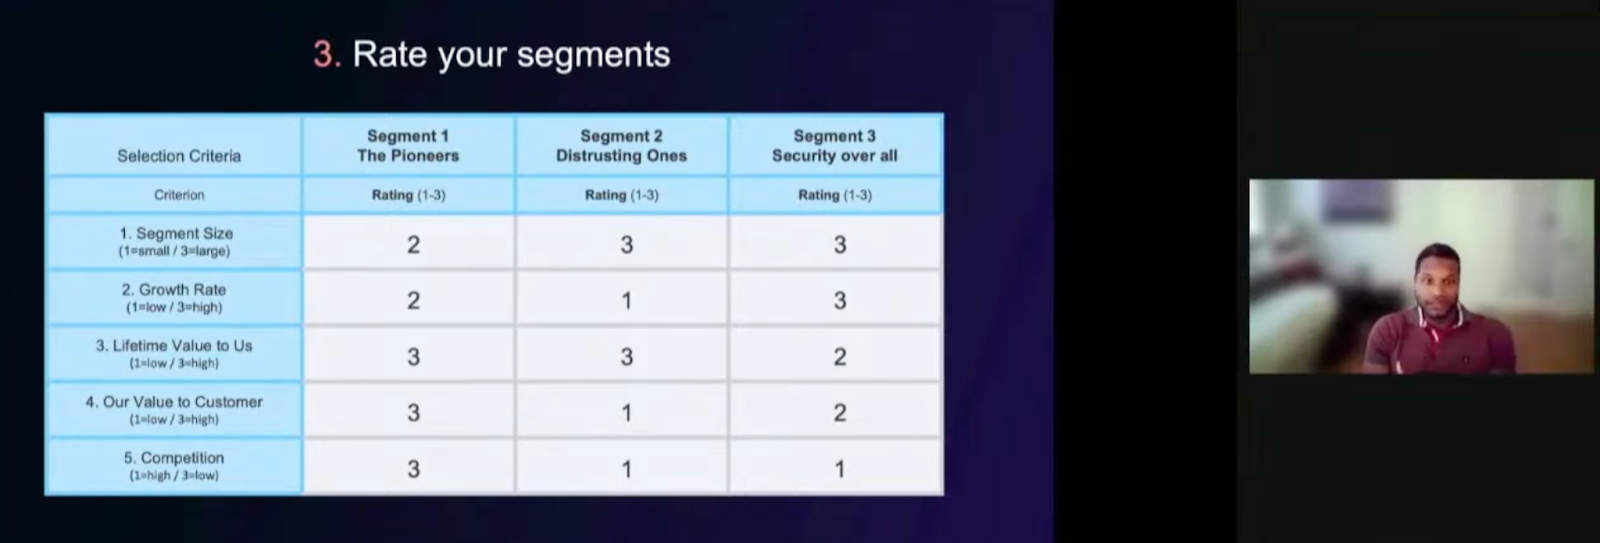 This is a presentation slide showing the table from the last image, but is titled "Rate your segments" and the table is filled in with a rating from 1-3. 